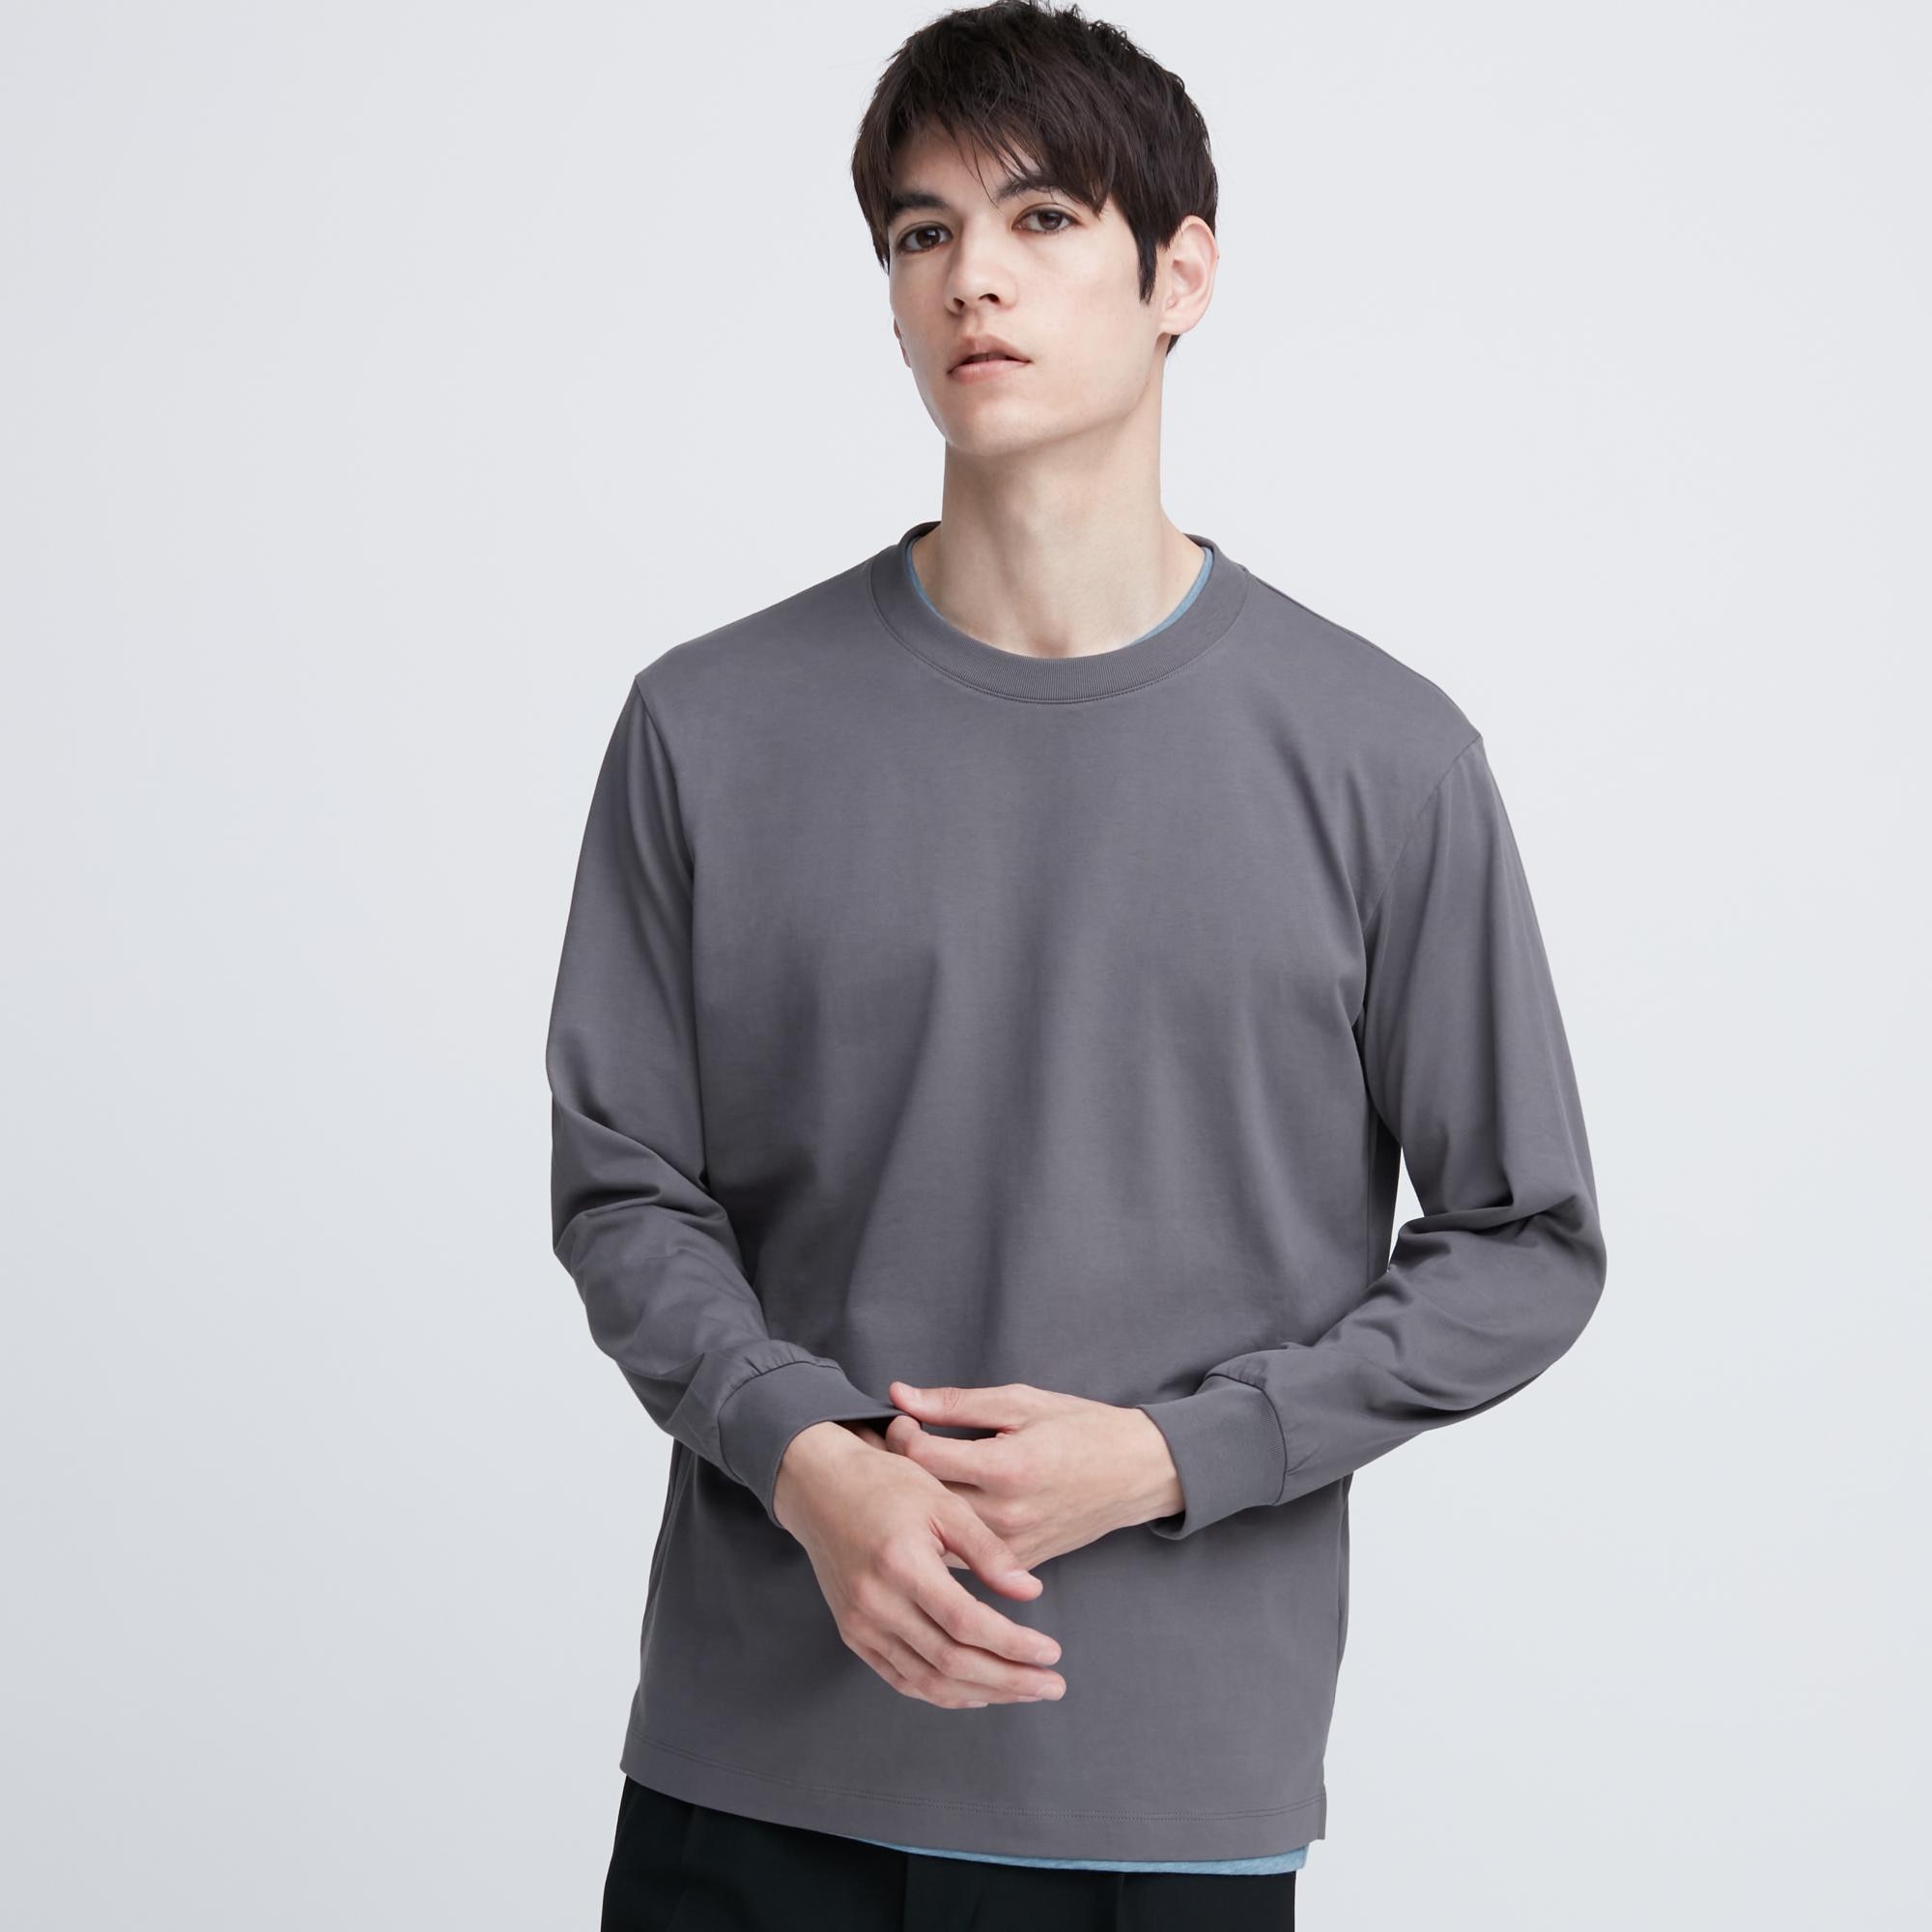 AIRism Cotton UV Protection Crew Neck Long-Sleeve T-Shirt